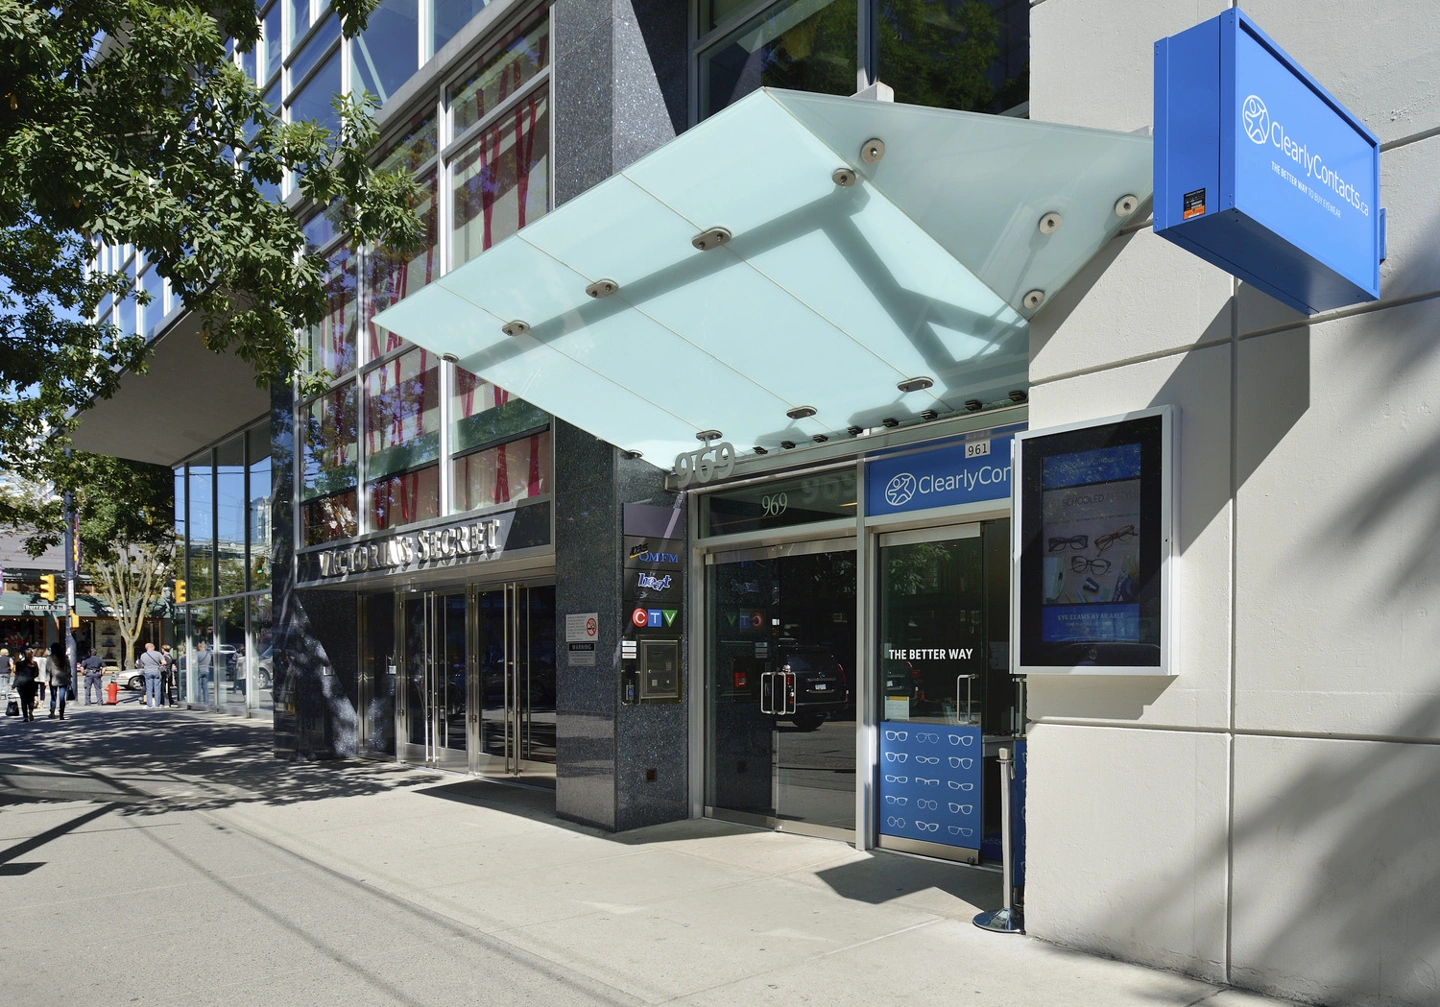 969 Robson Street, 969 Robson Street, Vancouver, British Columbia, V6Z 2V7, Office, For Lease